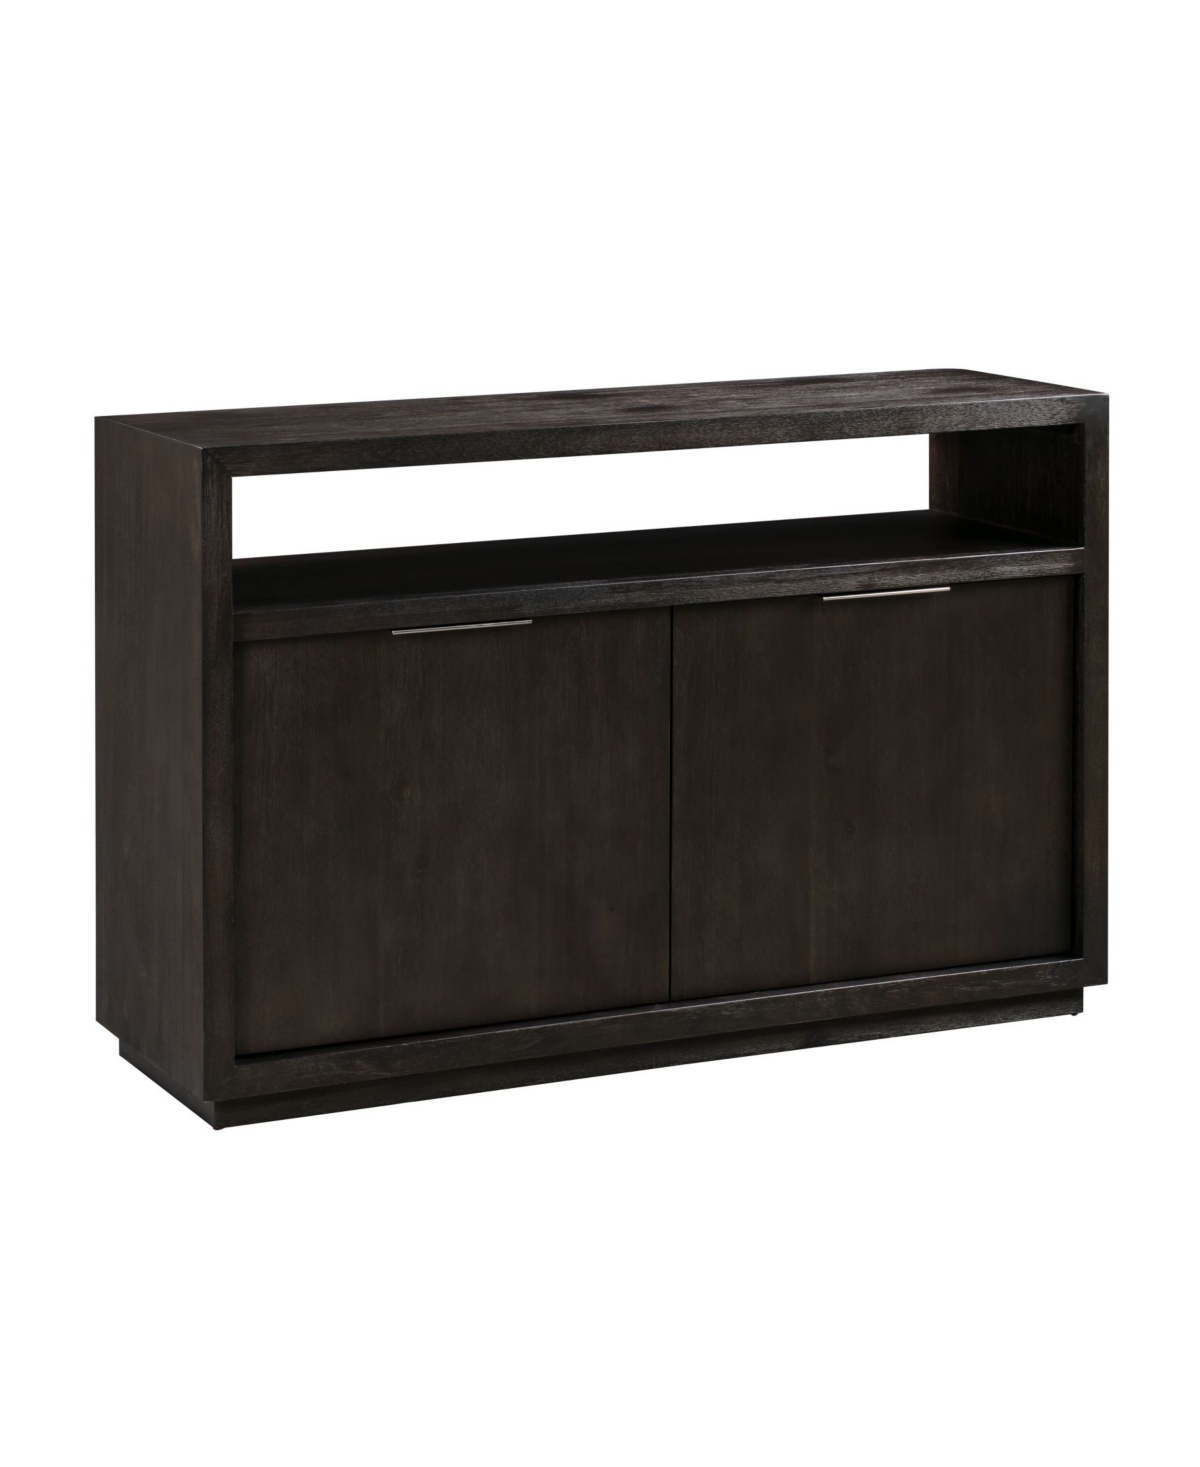 Macy's Tivie 54" Wood Entertainment Console In Basalt Gray